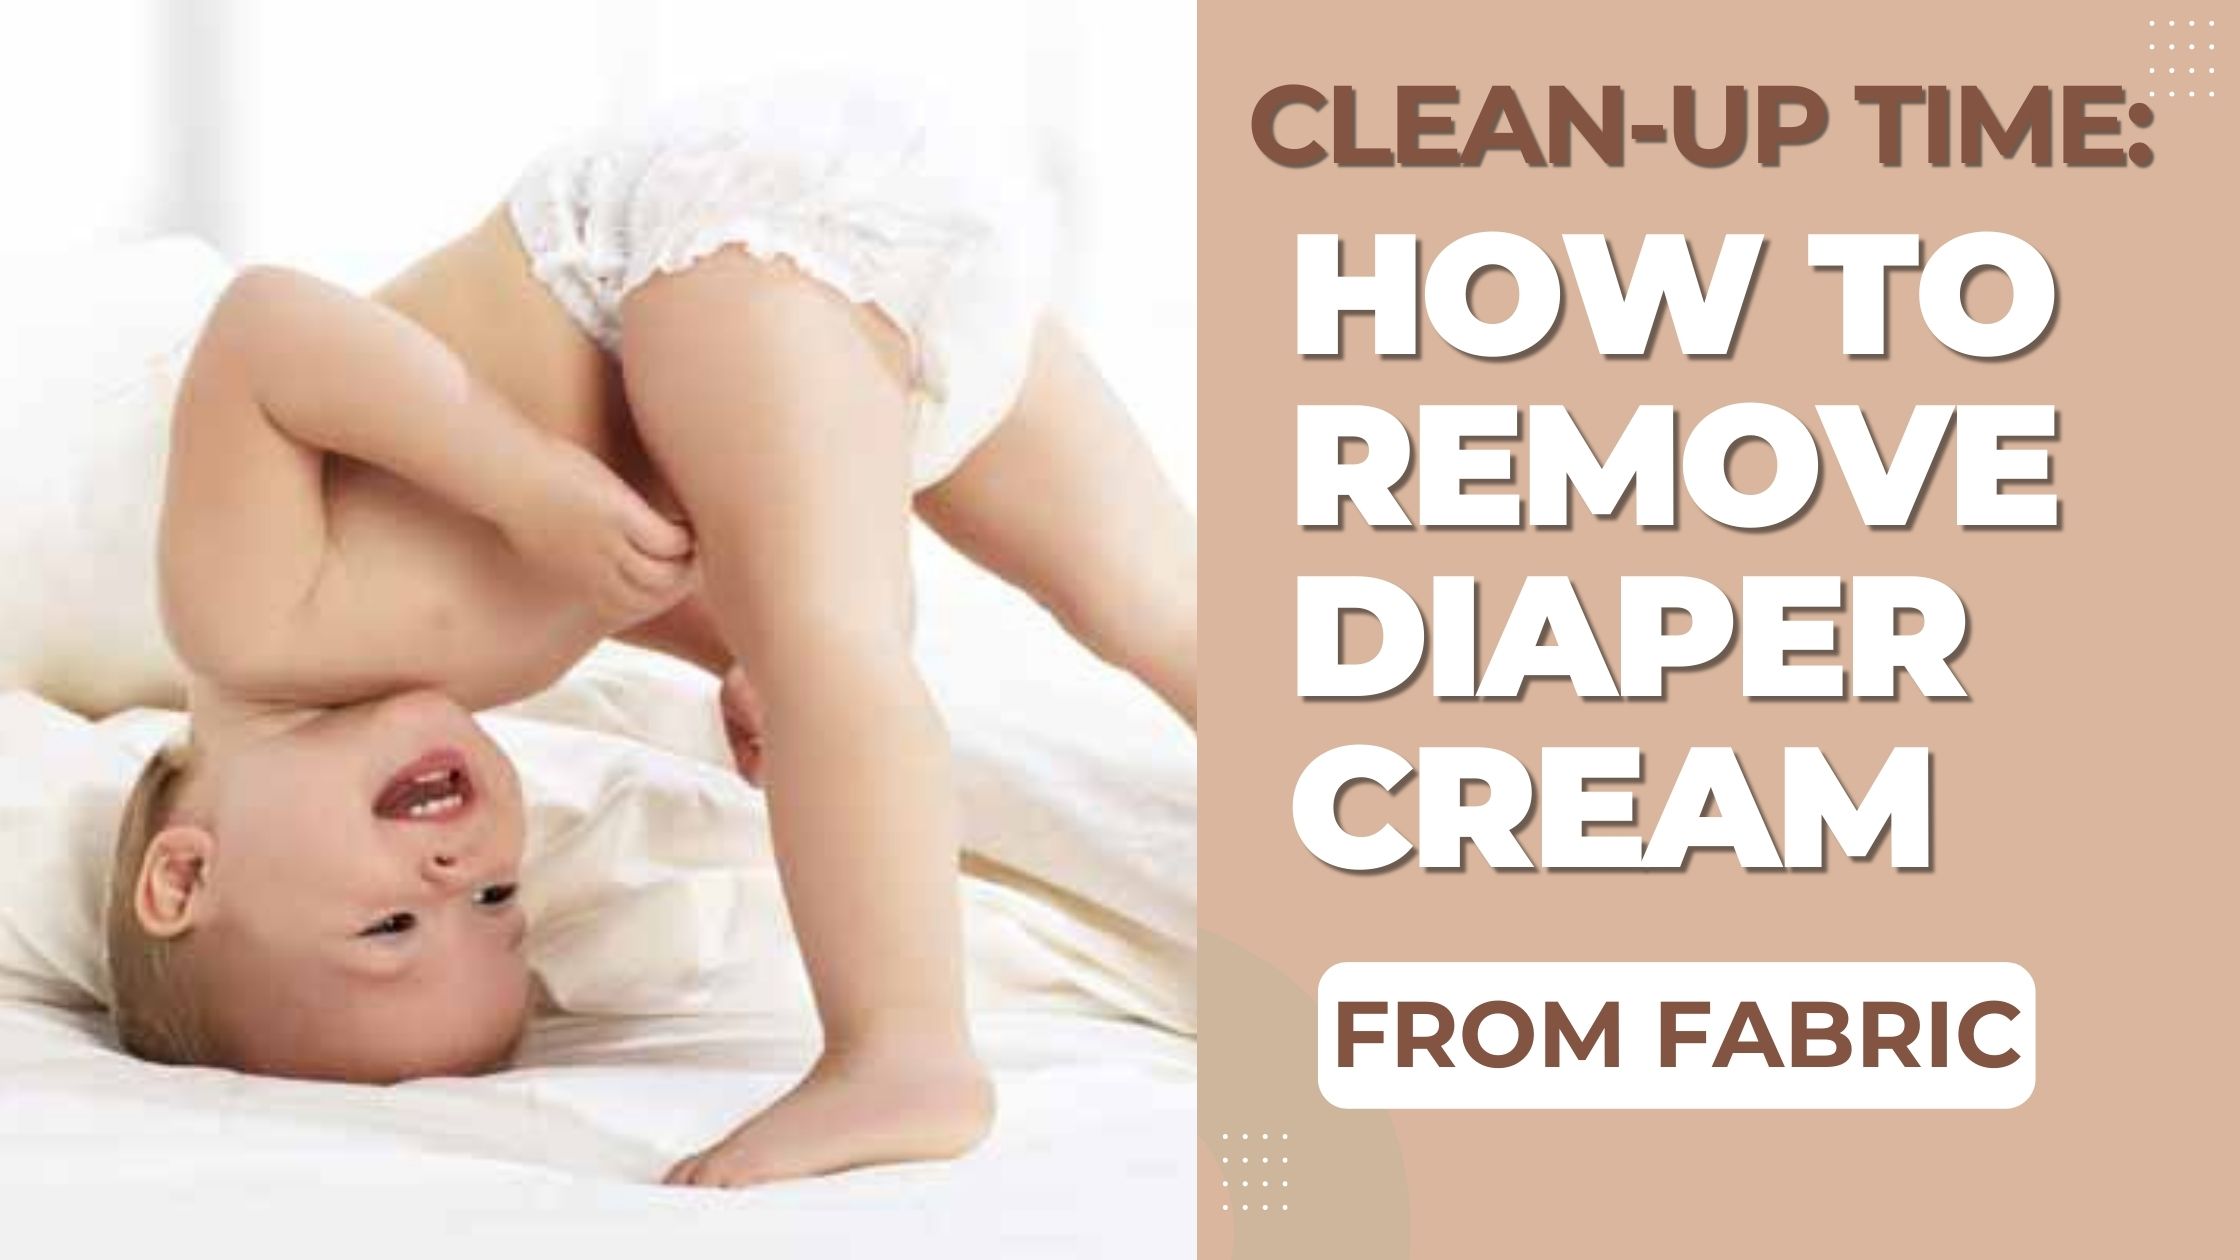 How To Remove Diaper Cream From Fabric